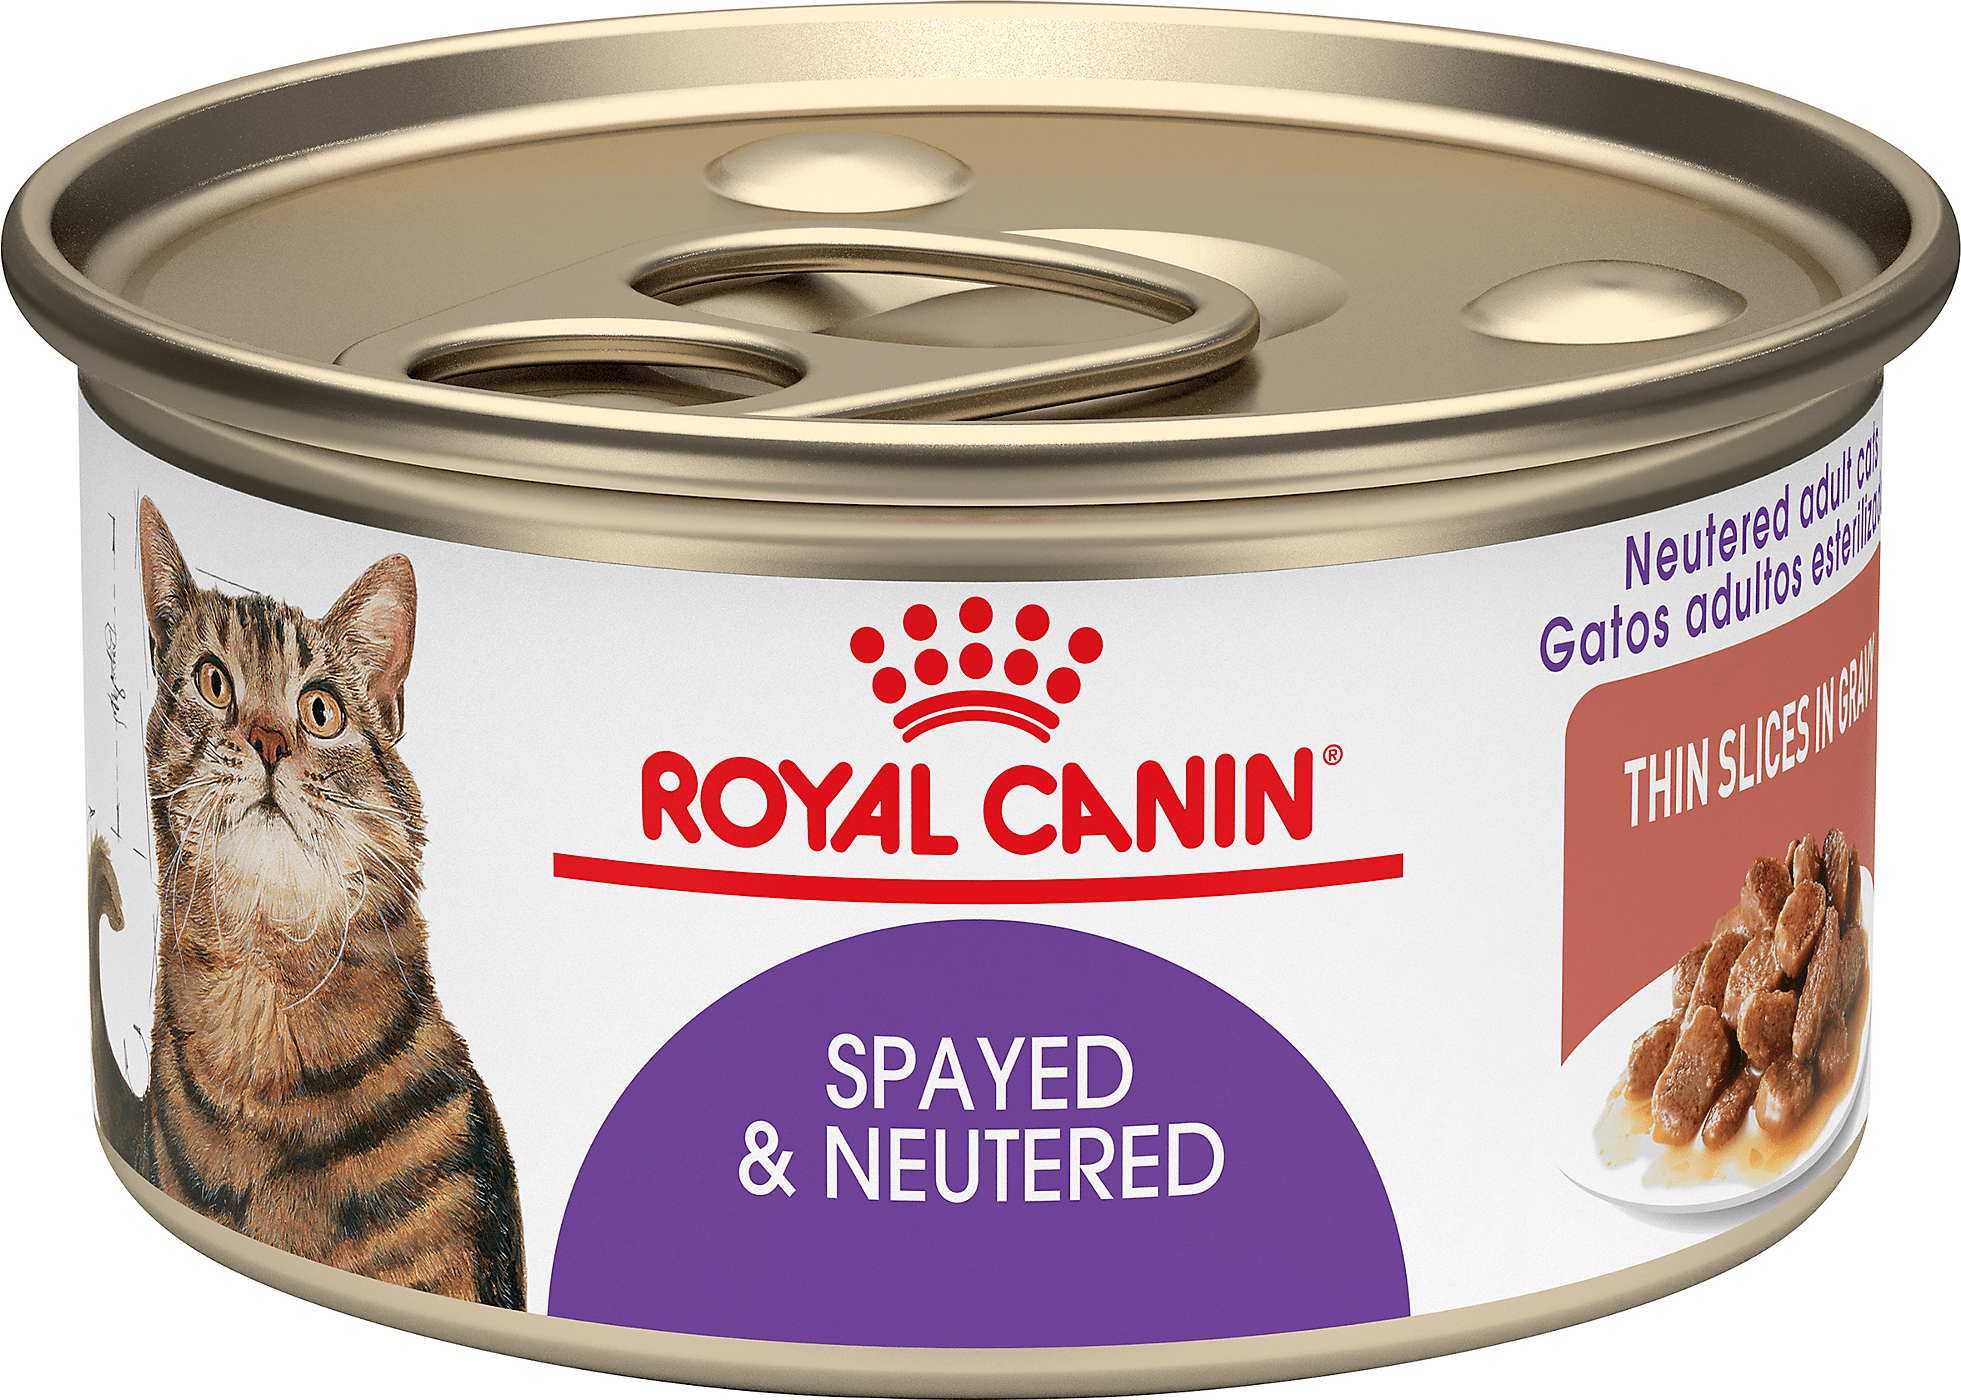 Royal Canin Spayed & Neutered Thin Slices In Gravy